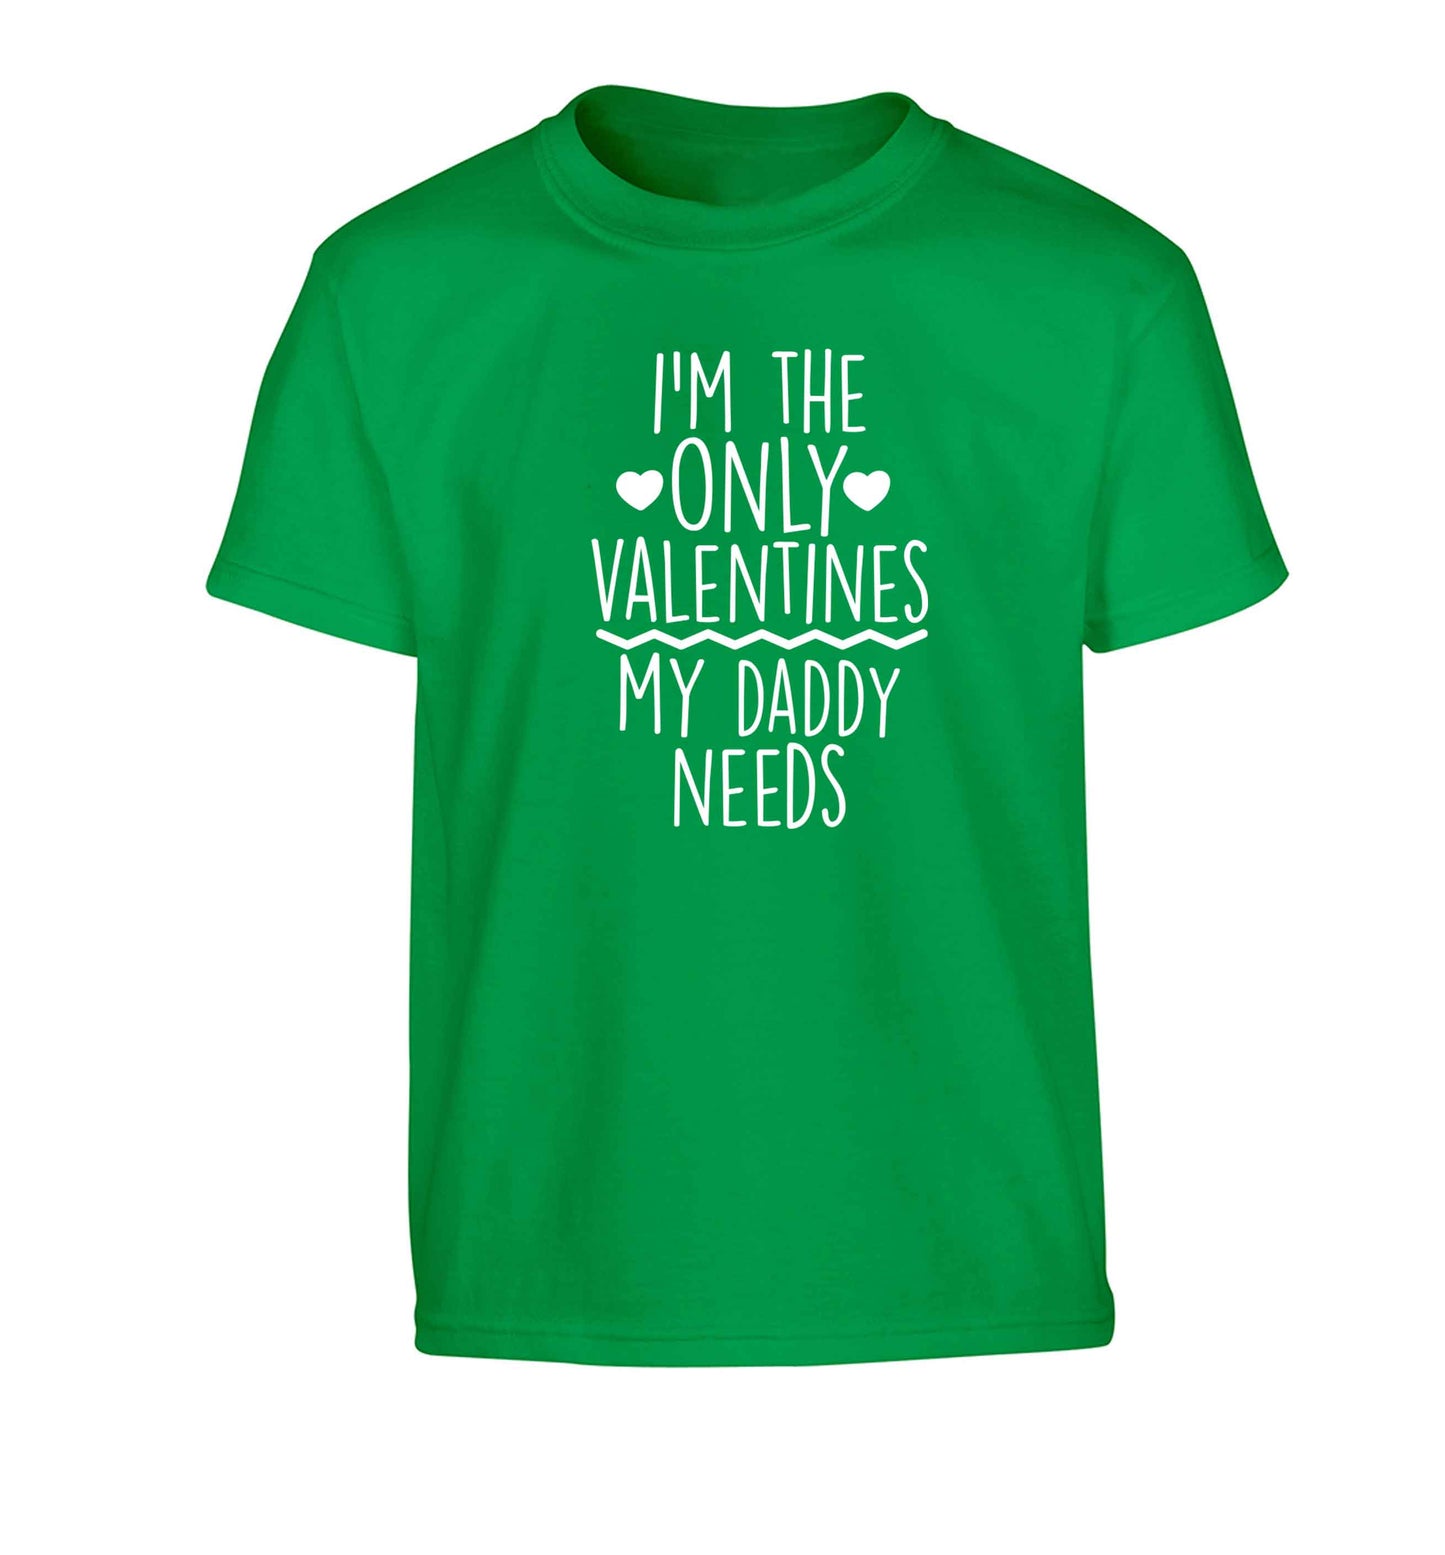 I'm the only valentines my daddy needs Children's green Tshirt 12-13 Years